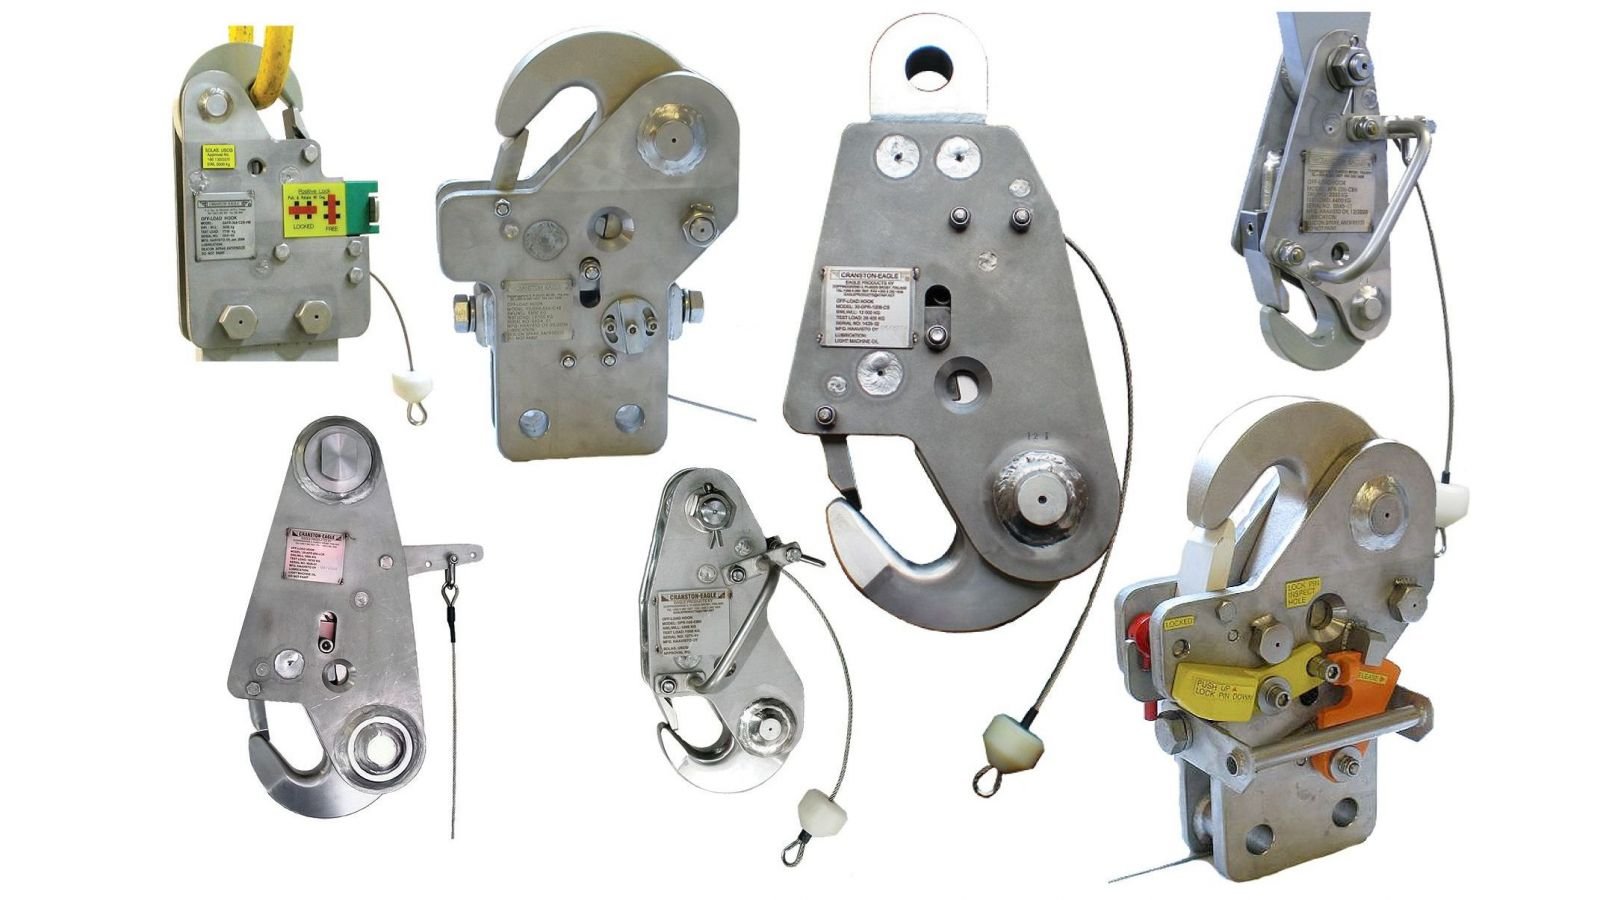 Load release. Automatic Marine Hook. Release Hook. Automatic release Hook. 0lsa0558300.